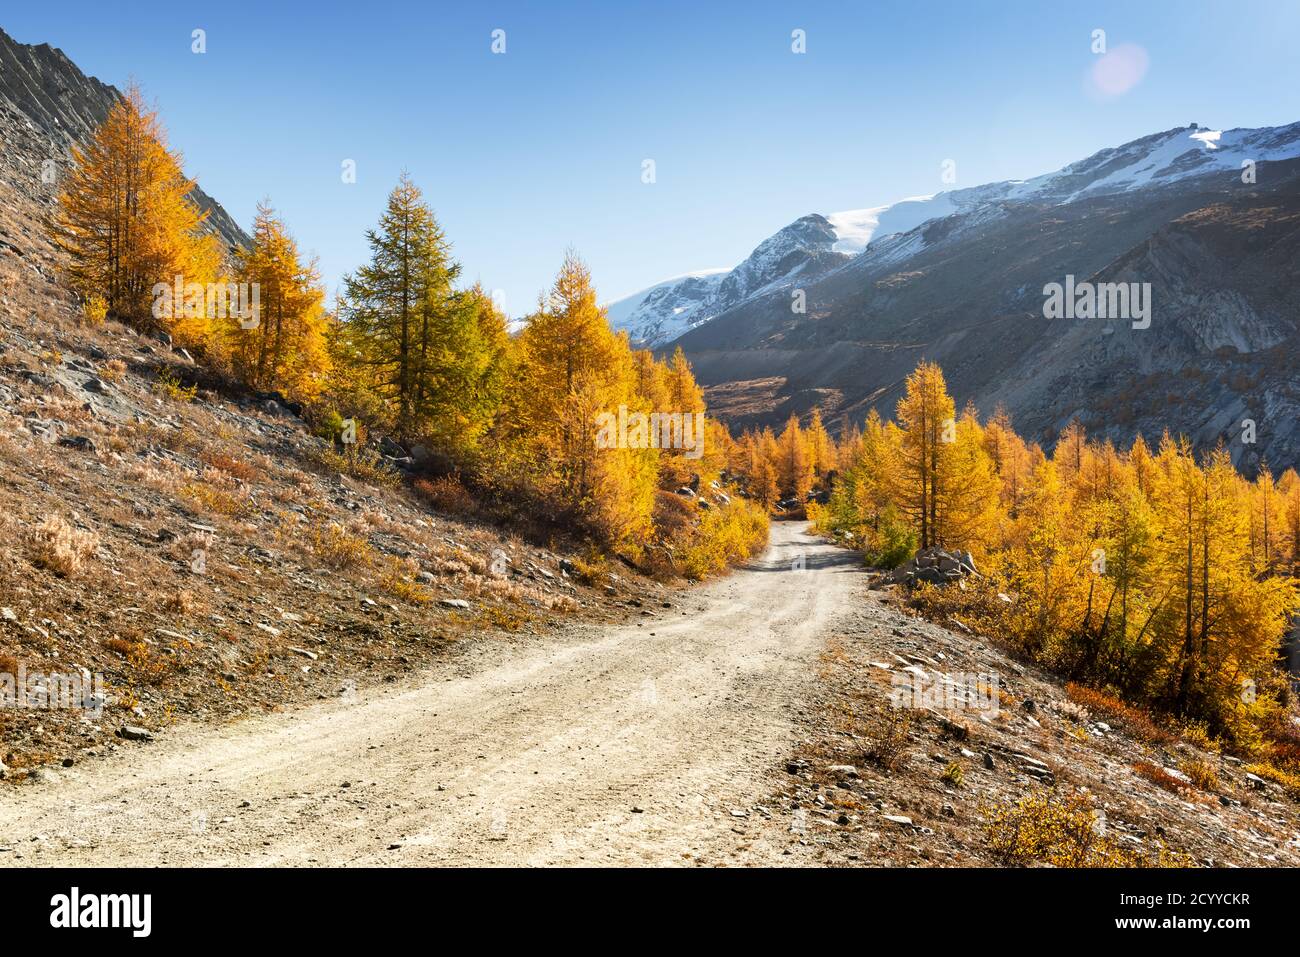 Amazing autumn landscape with road, orange larch forest and snowy mountains on background Stock Photo